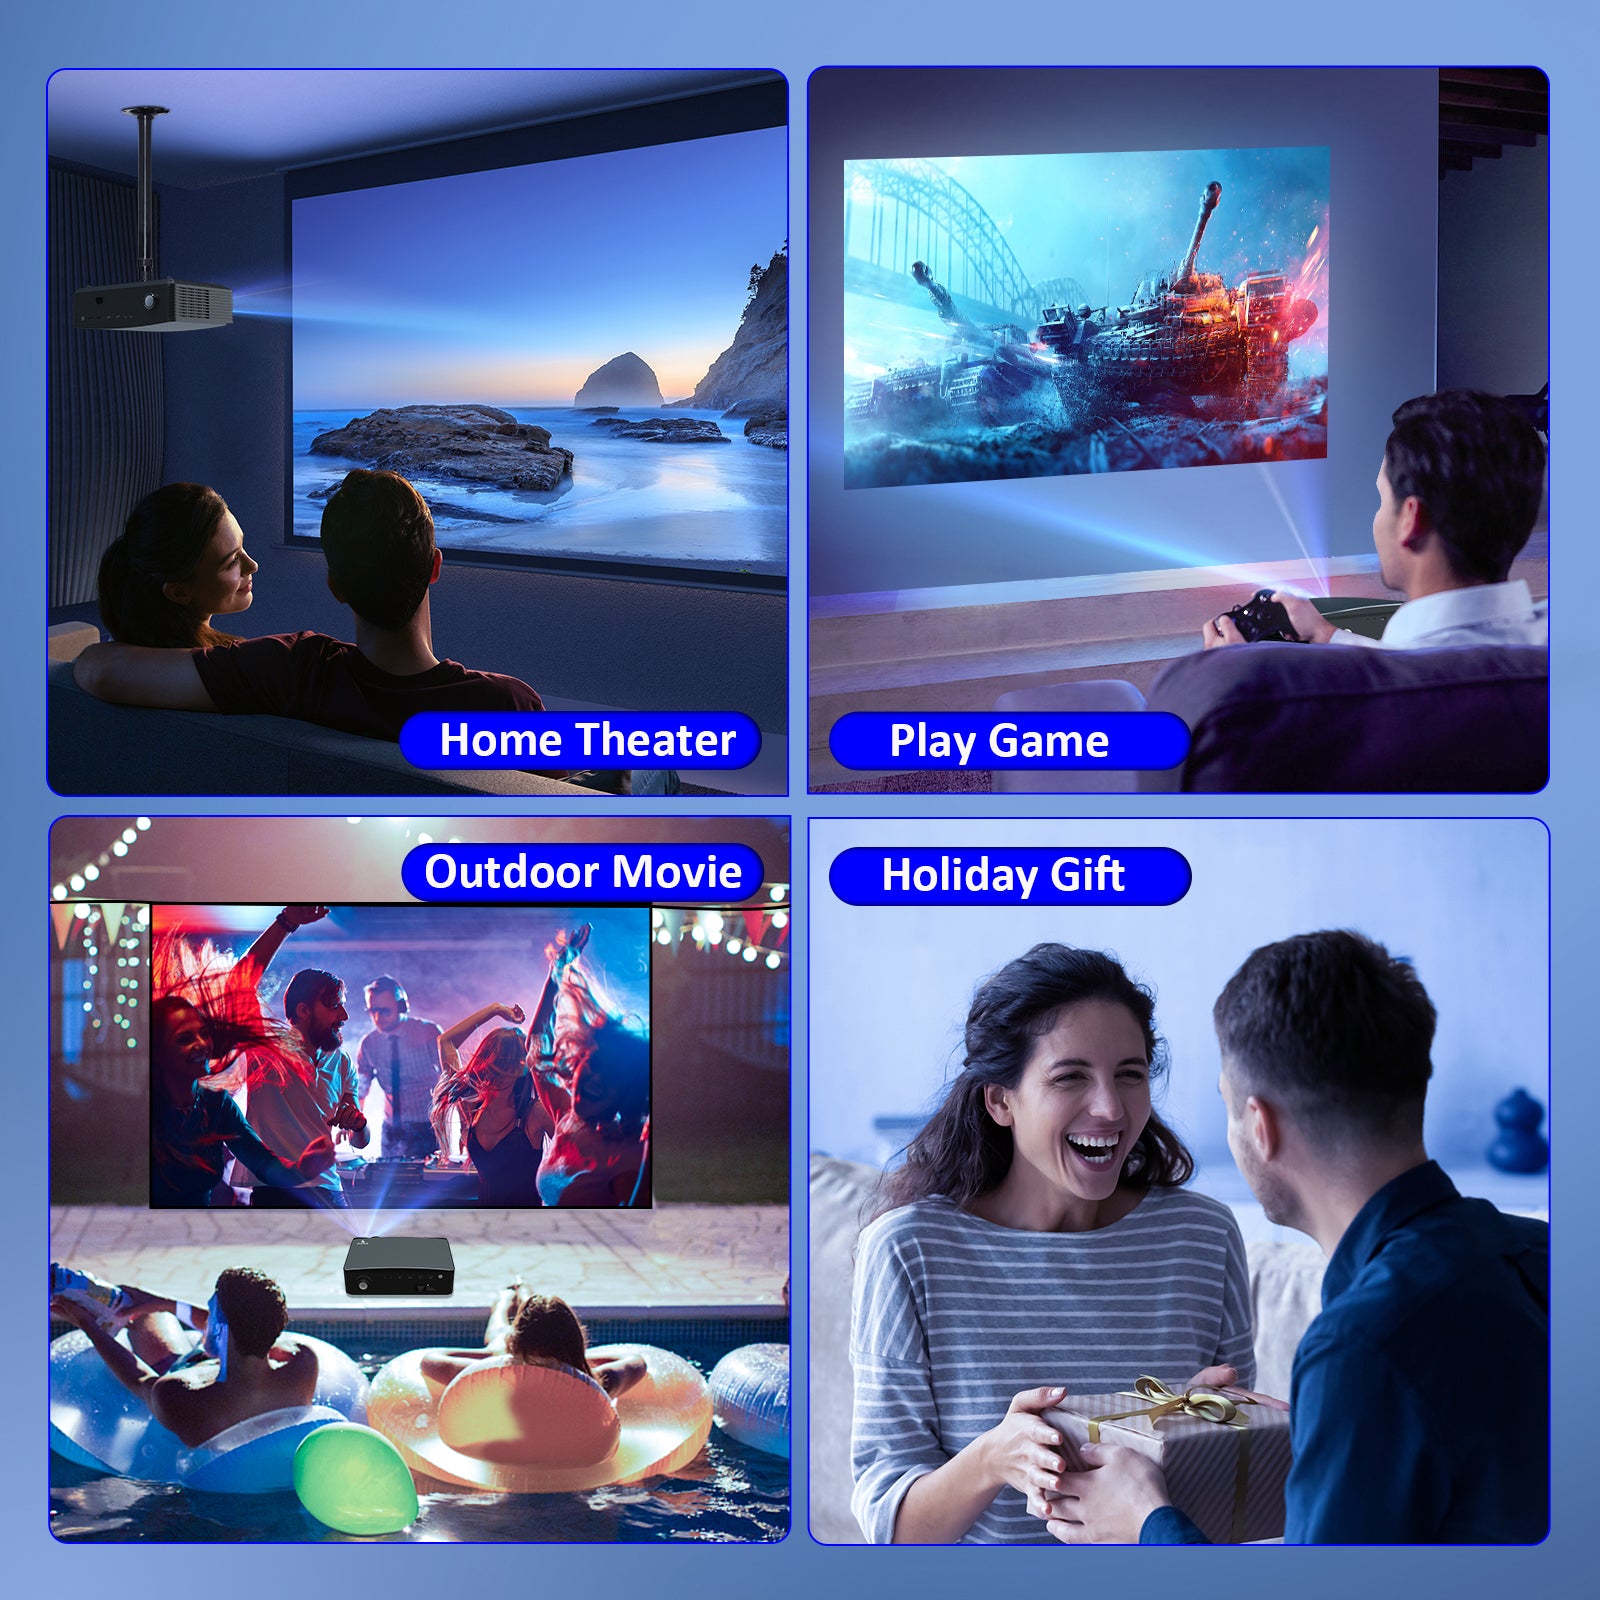 The PJ20 projector is the best choice for Home Theater, Outdoor Movie, Gaming, and Holiday Gift.